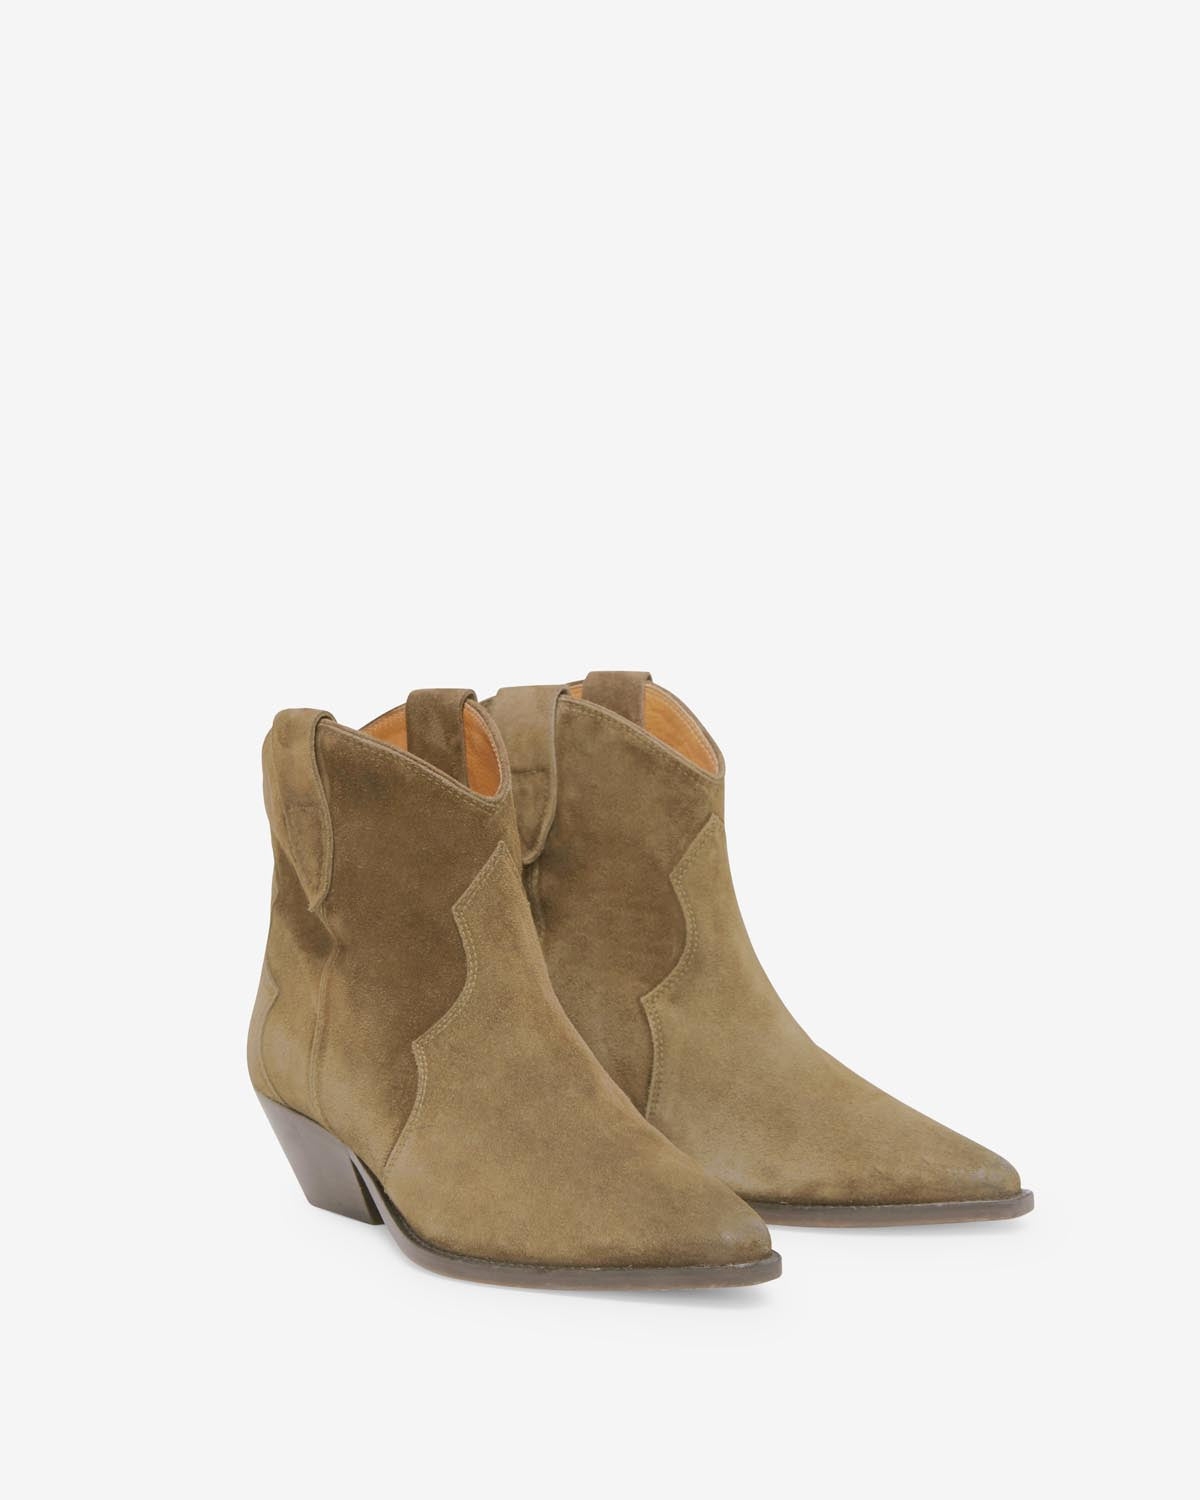 Dewina cowboy boots Woman Taupe 4